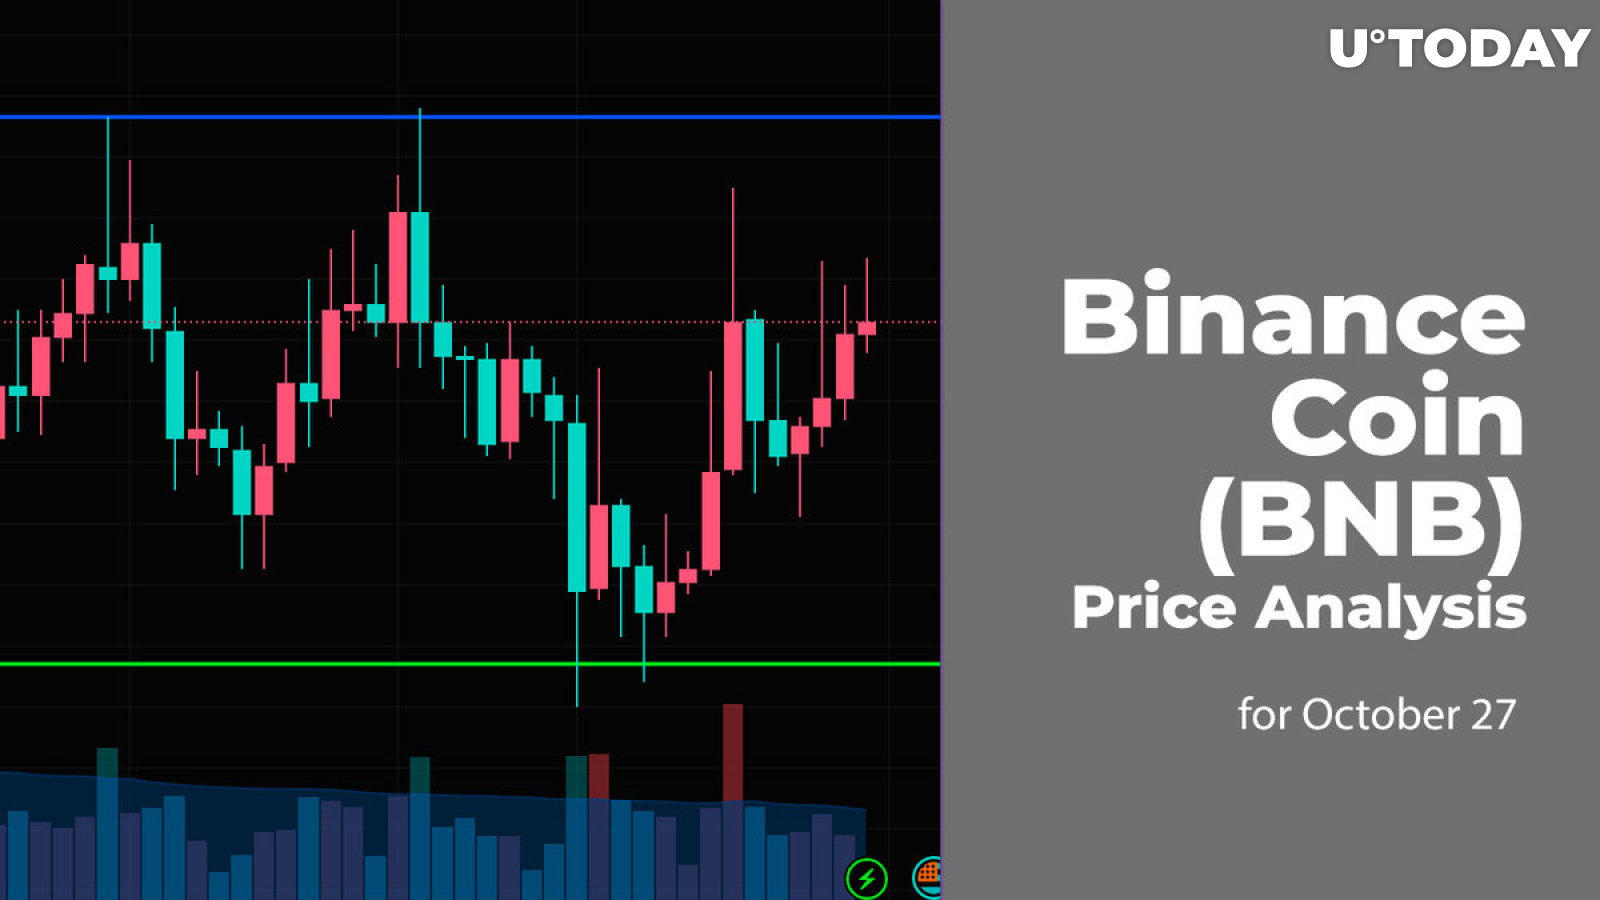 Binance Coin (BNB) Price Analysis for October 27